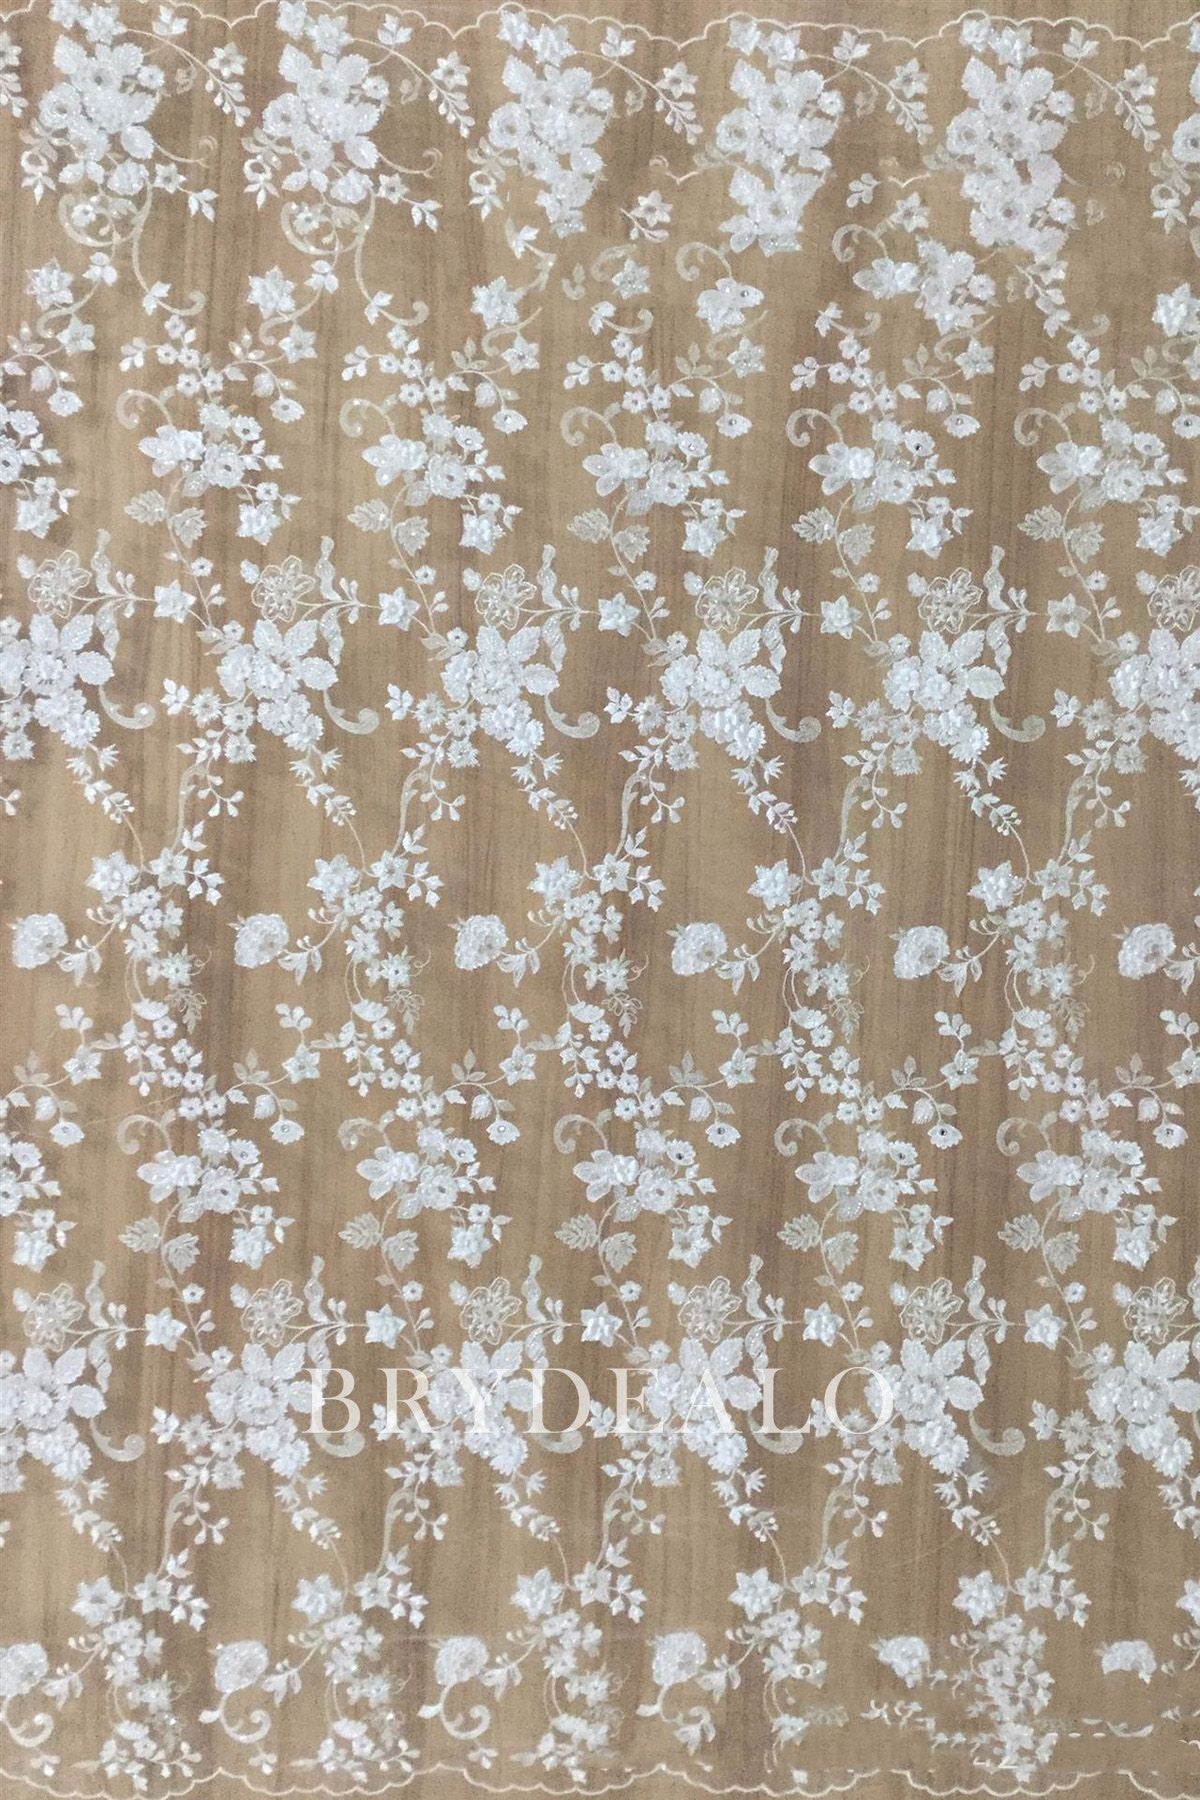 High Quality Beaded Flower Designer Lace Fabric